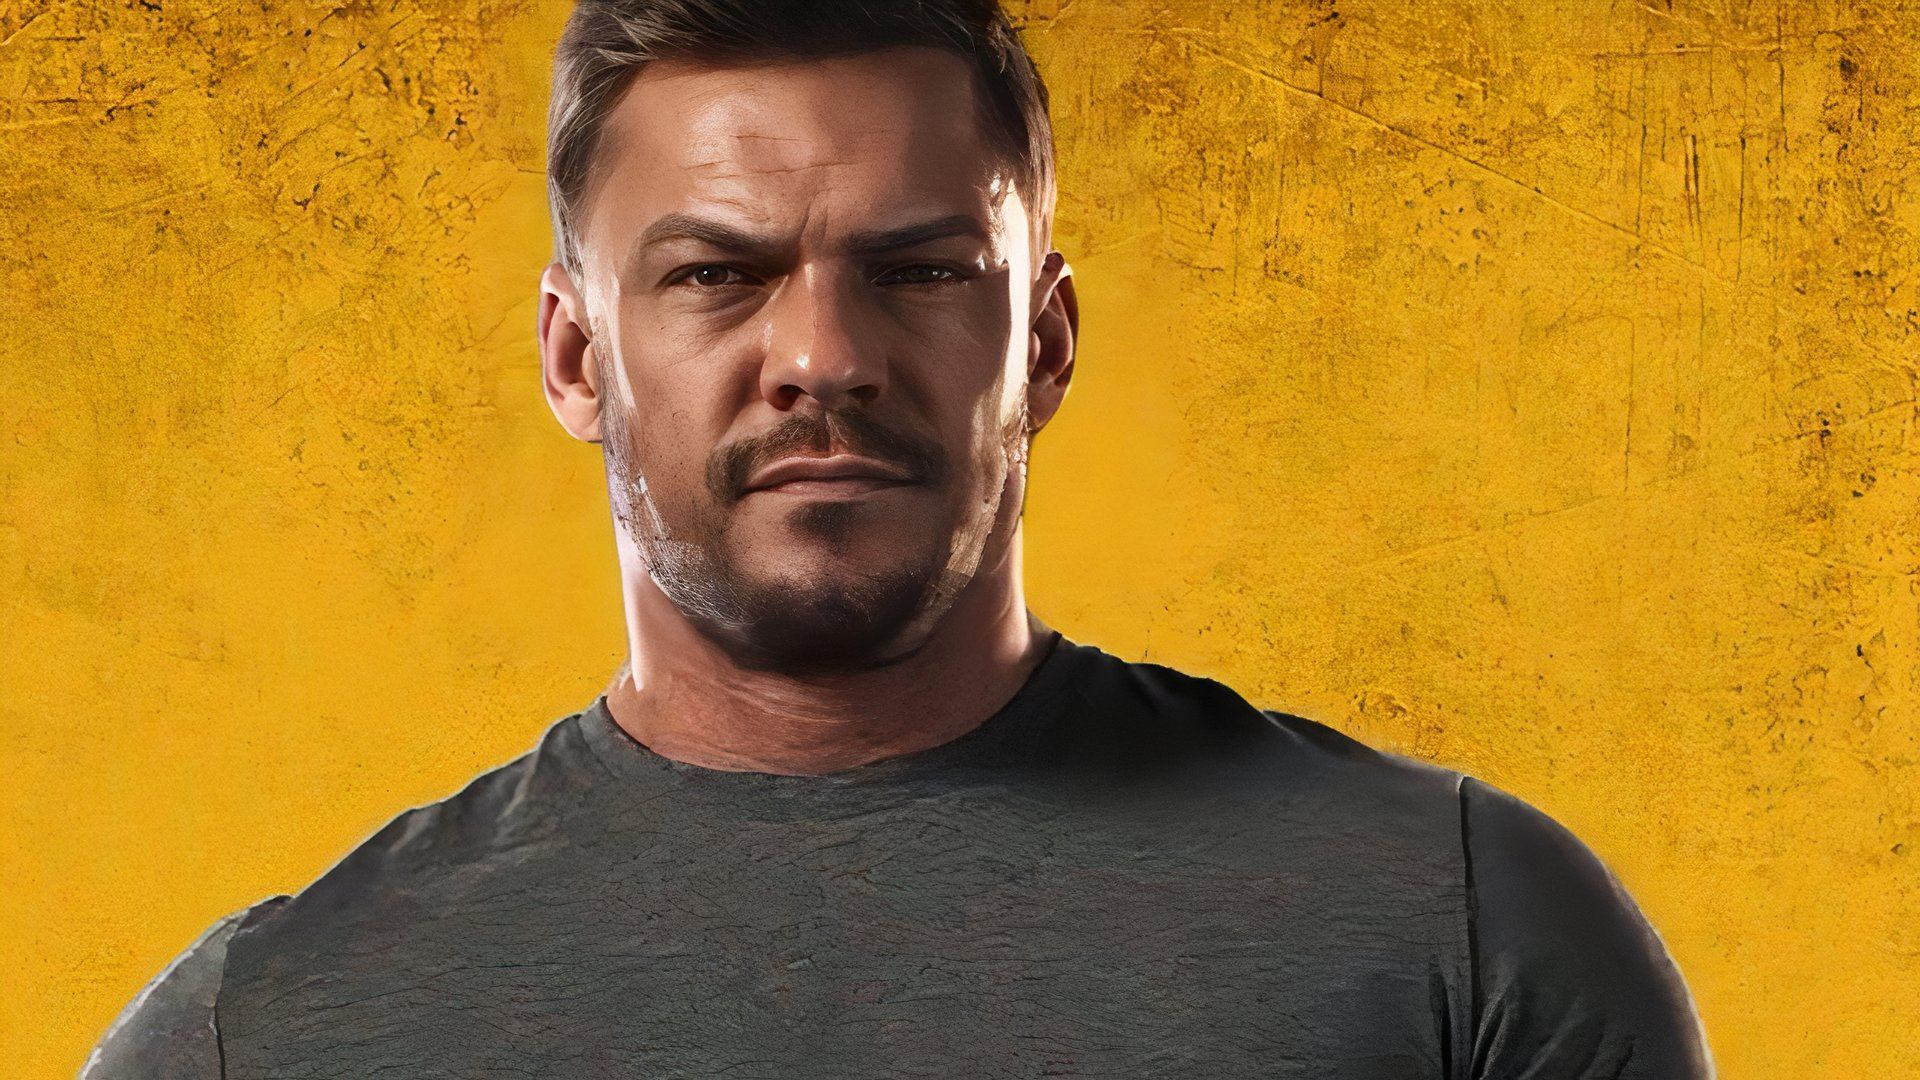 Alan Ritchson as Jack Reacher looking directly toward the camera with a yellow background